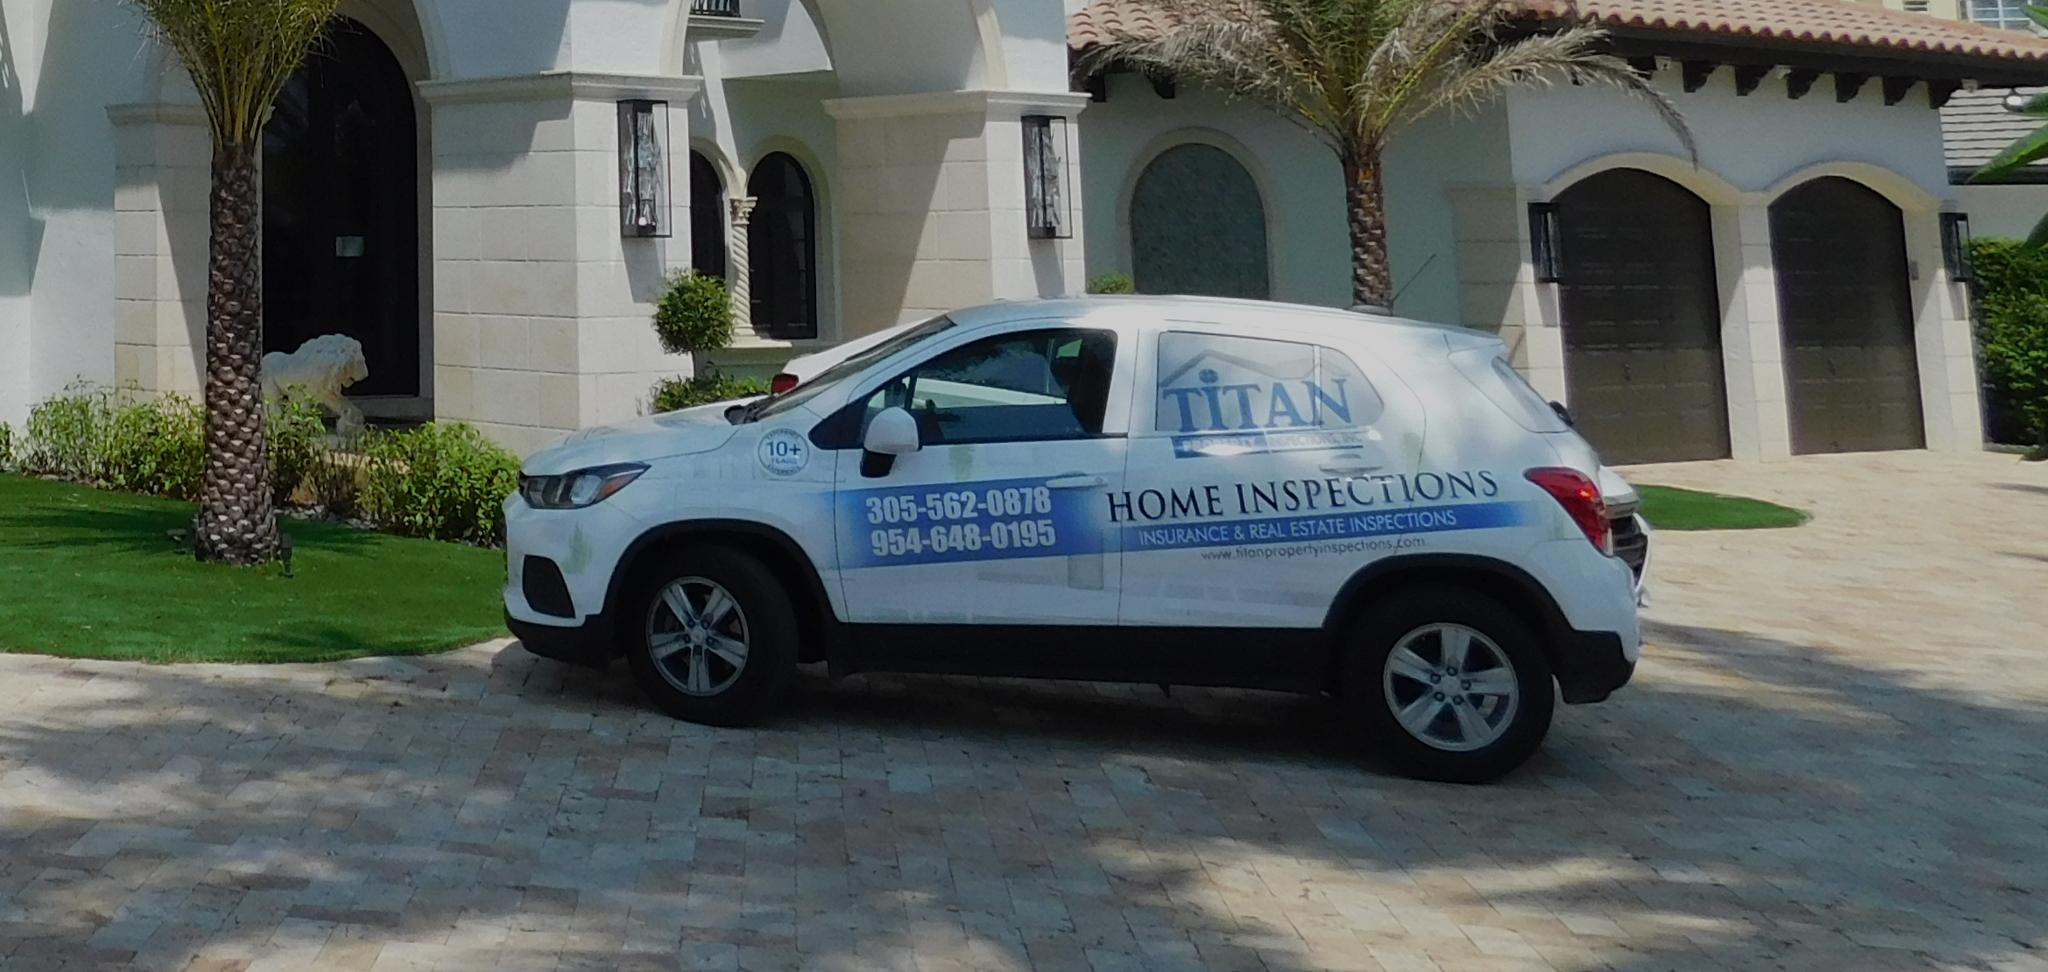 Contact Titan Property Inspections